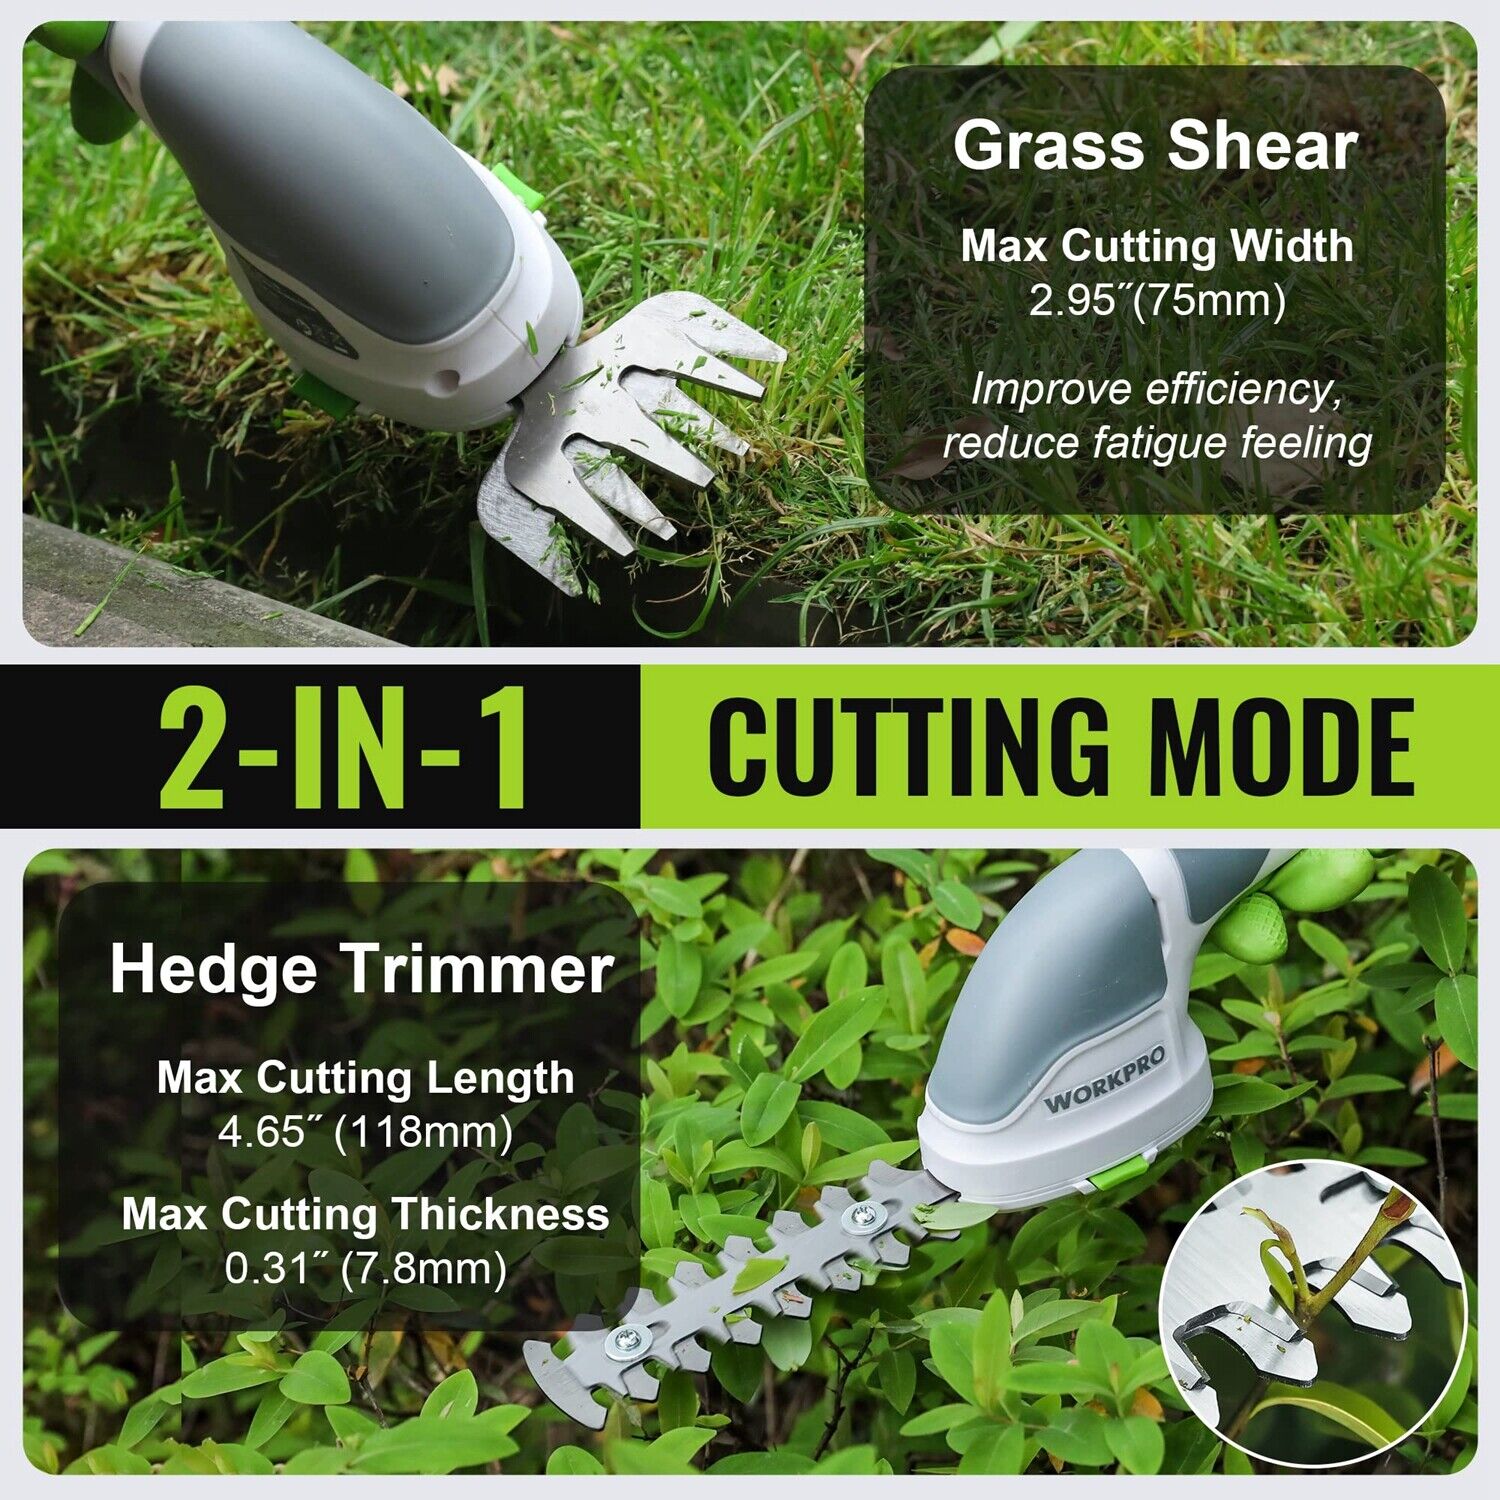 WORKPRO 2 In 1 Cordless Grass Shear Shrubbery Trimmer Hedge Shears/Grass Cutters